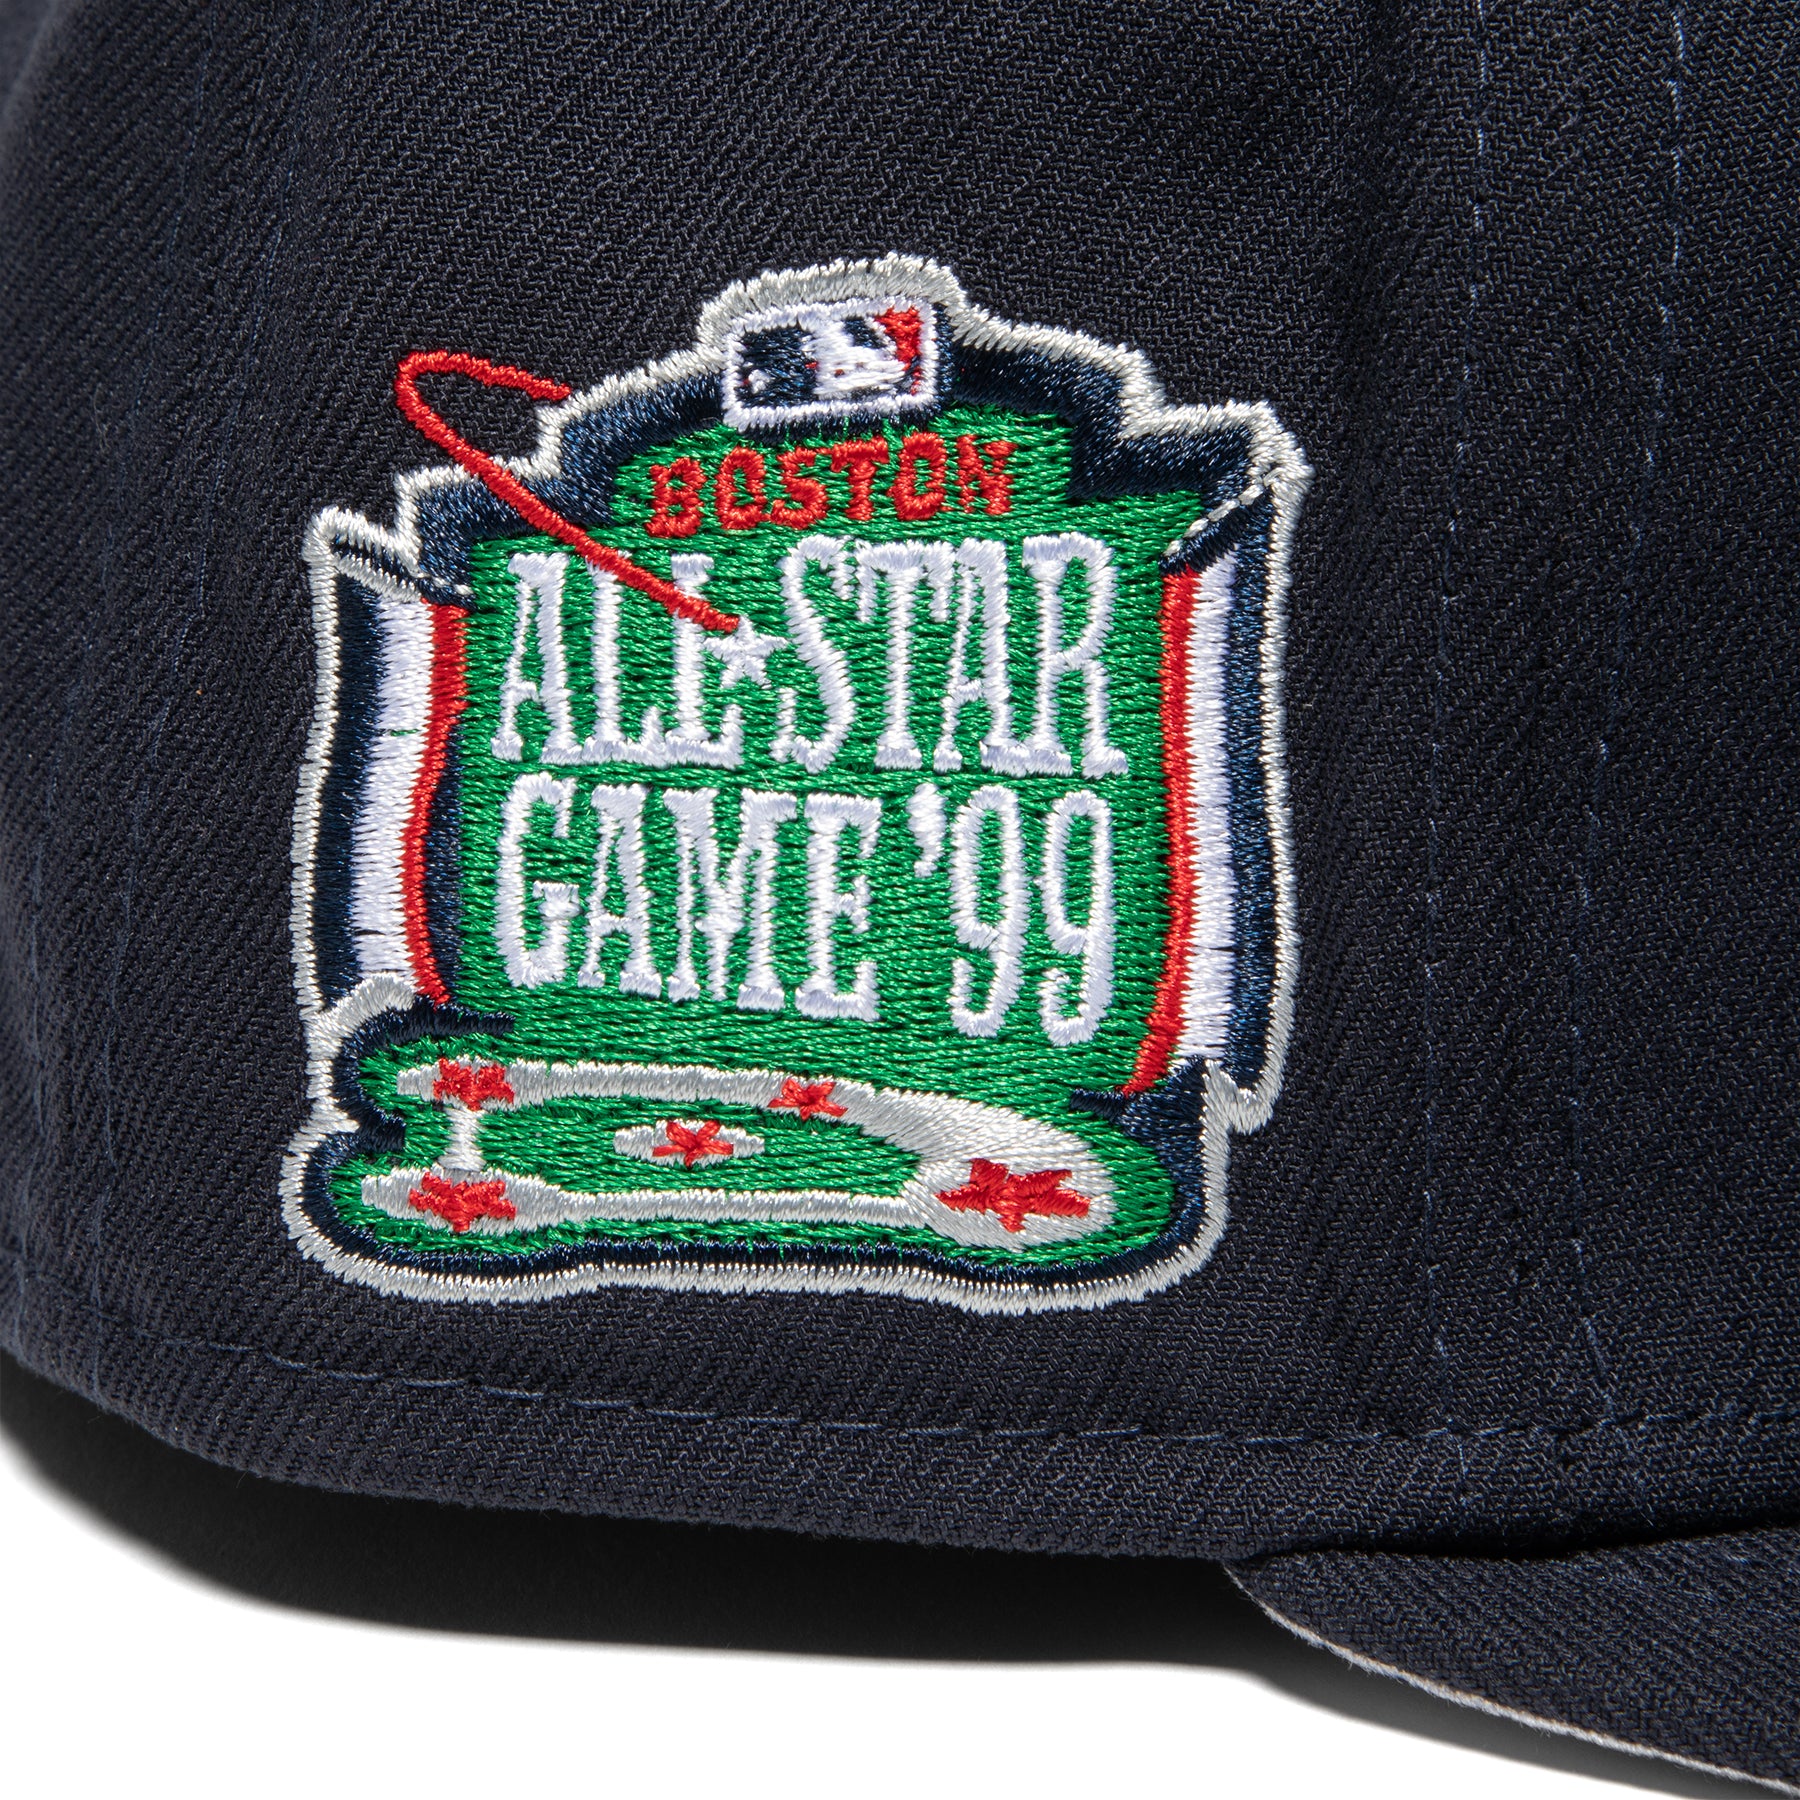 59FIFTY Boston Red Sox Khaki/Navy/Red 1903 World Series Patch